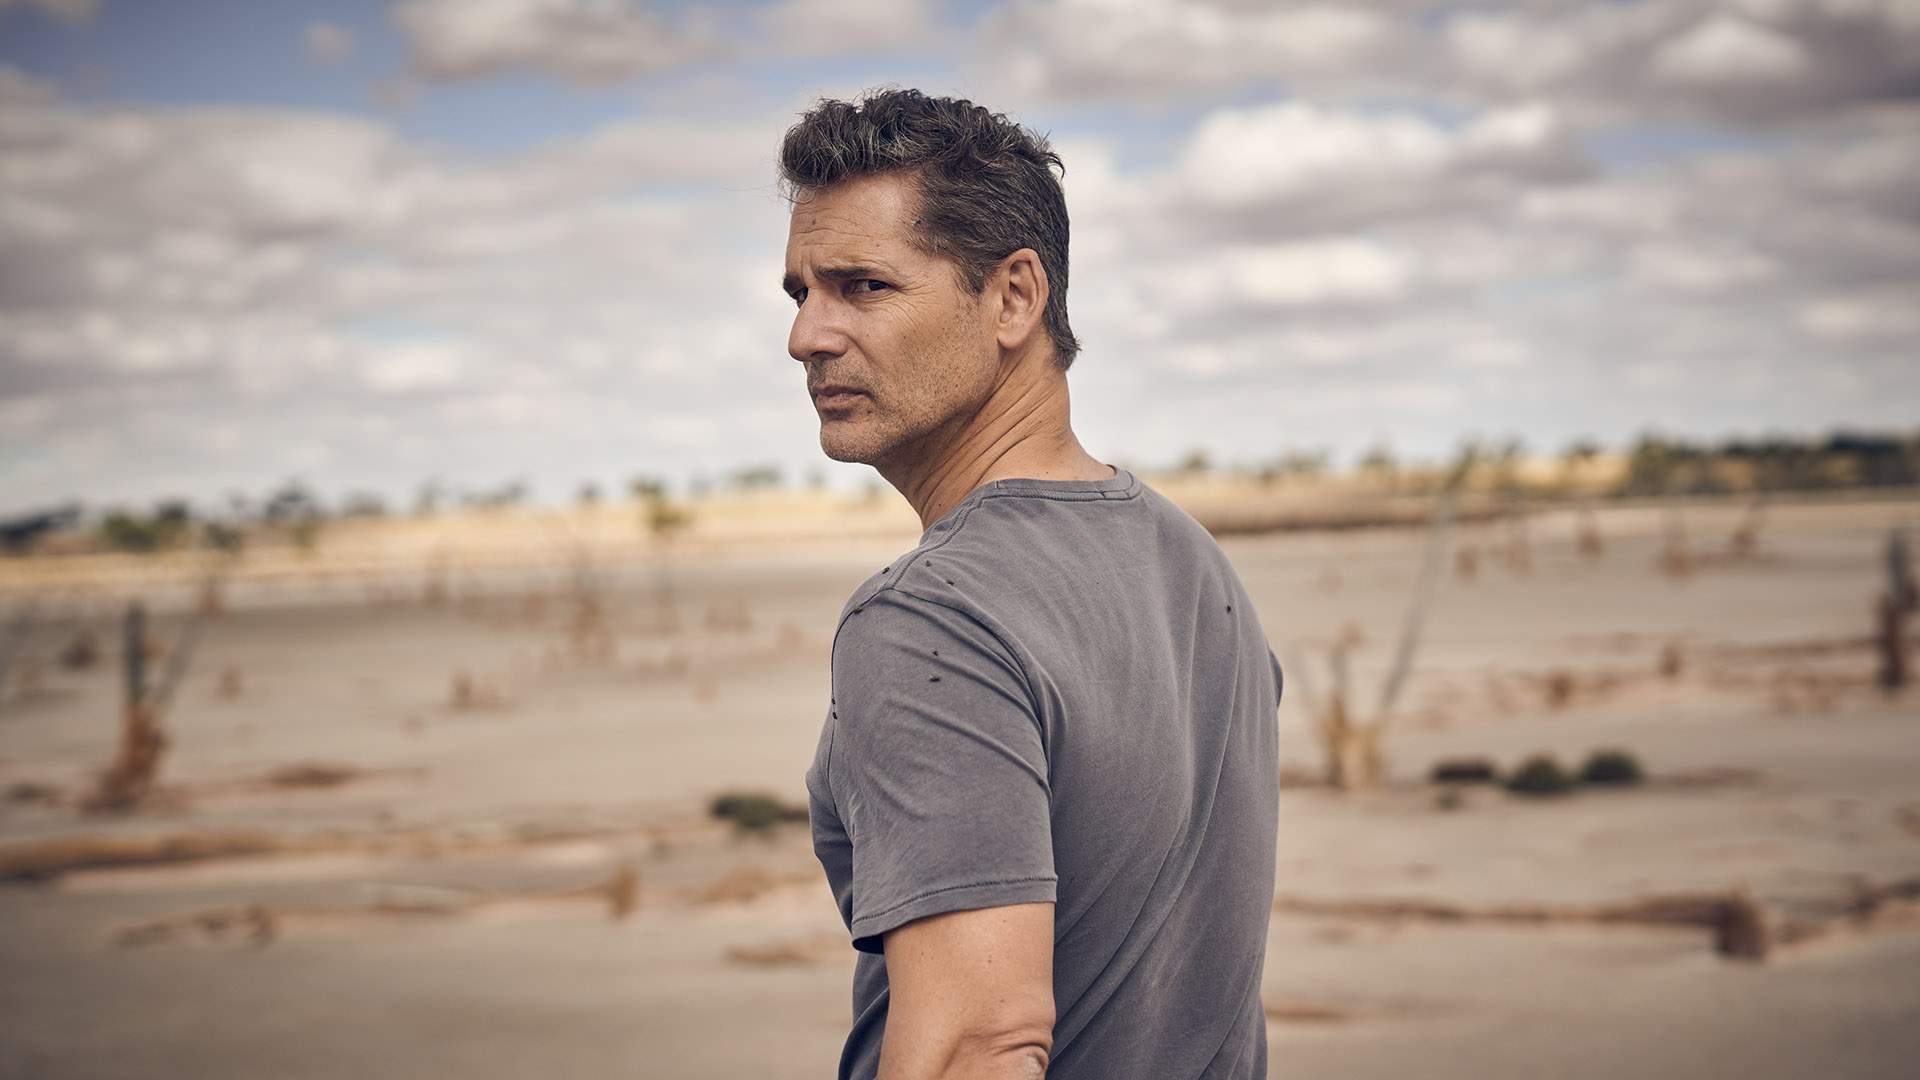 Award-Winning Aussie Crime Novel 'The Dry' Has Been Adapted Into a Movie Starring Eric Bana